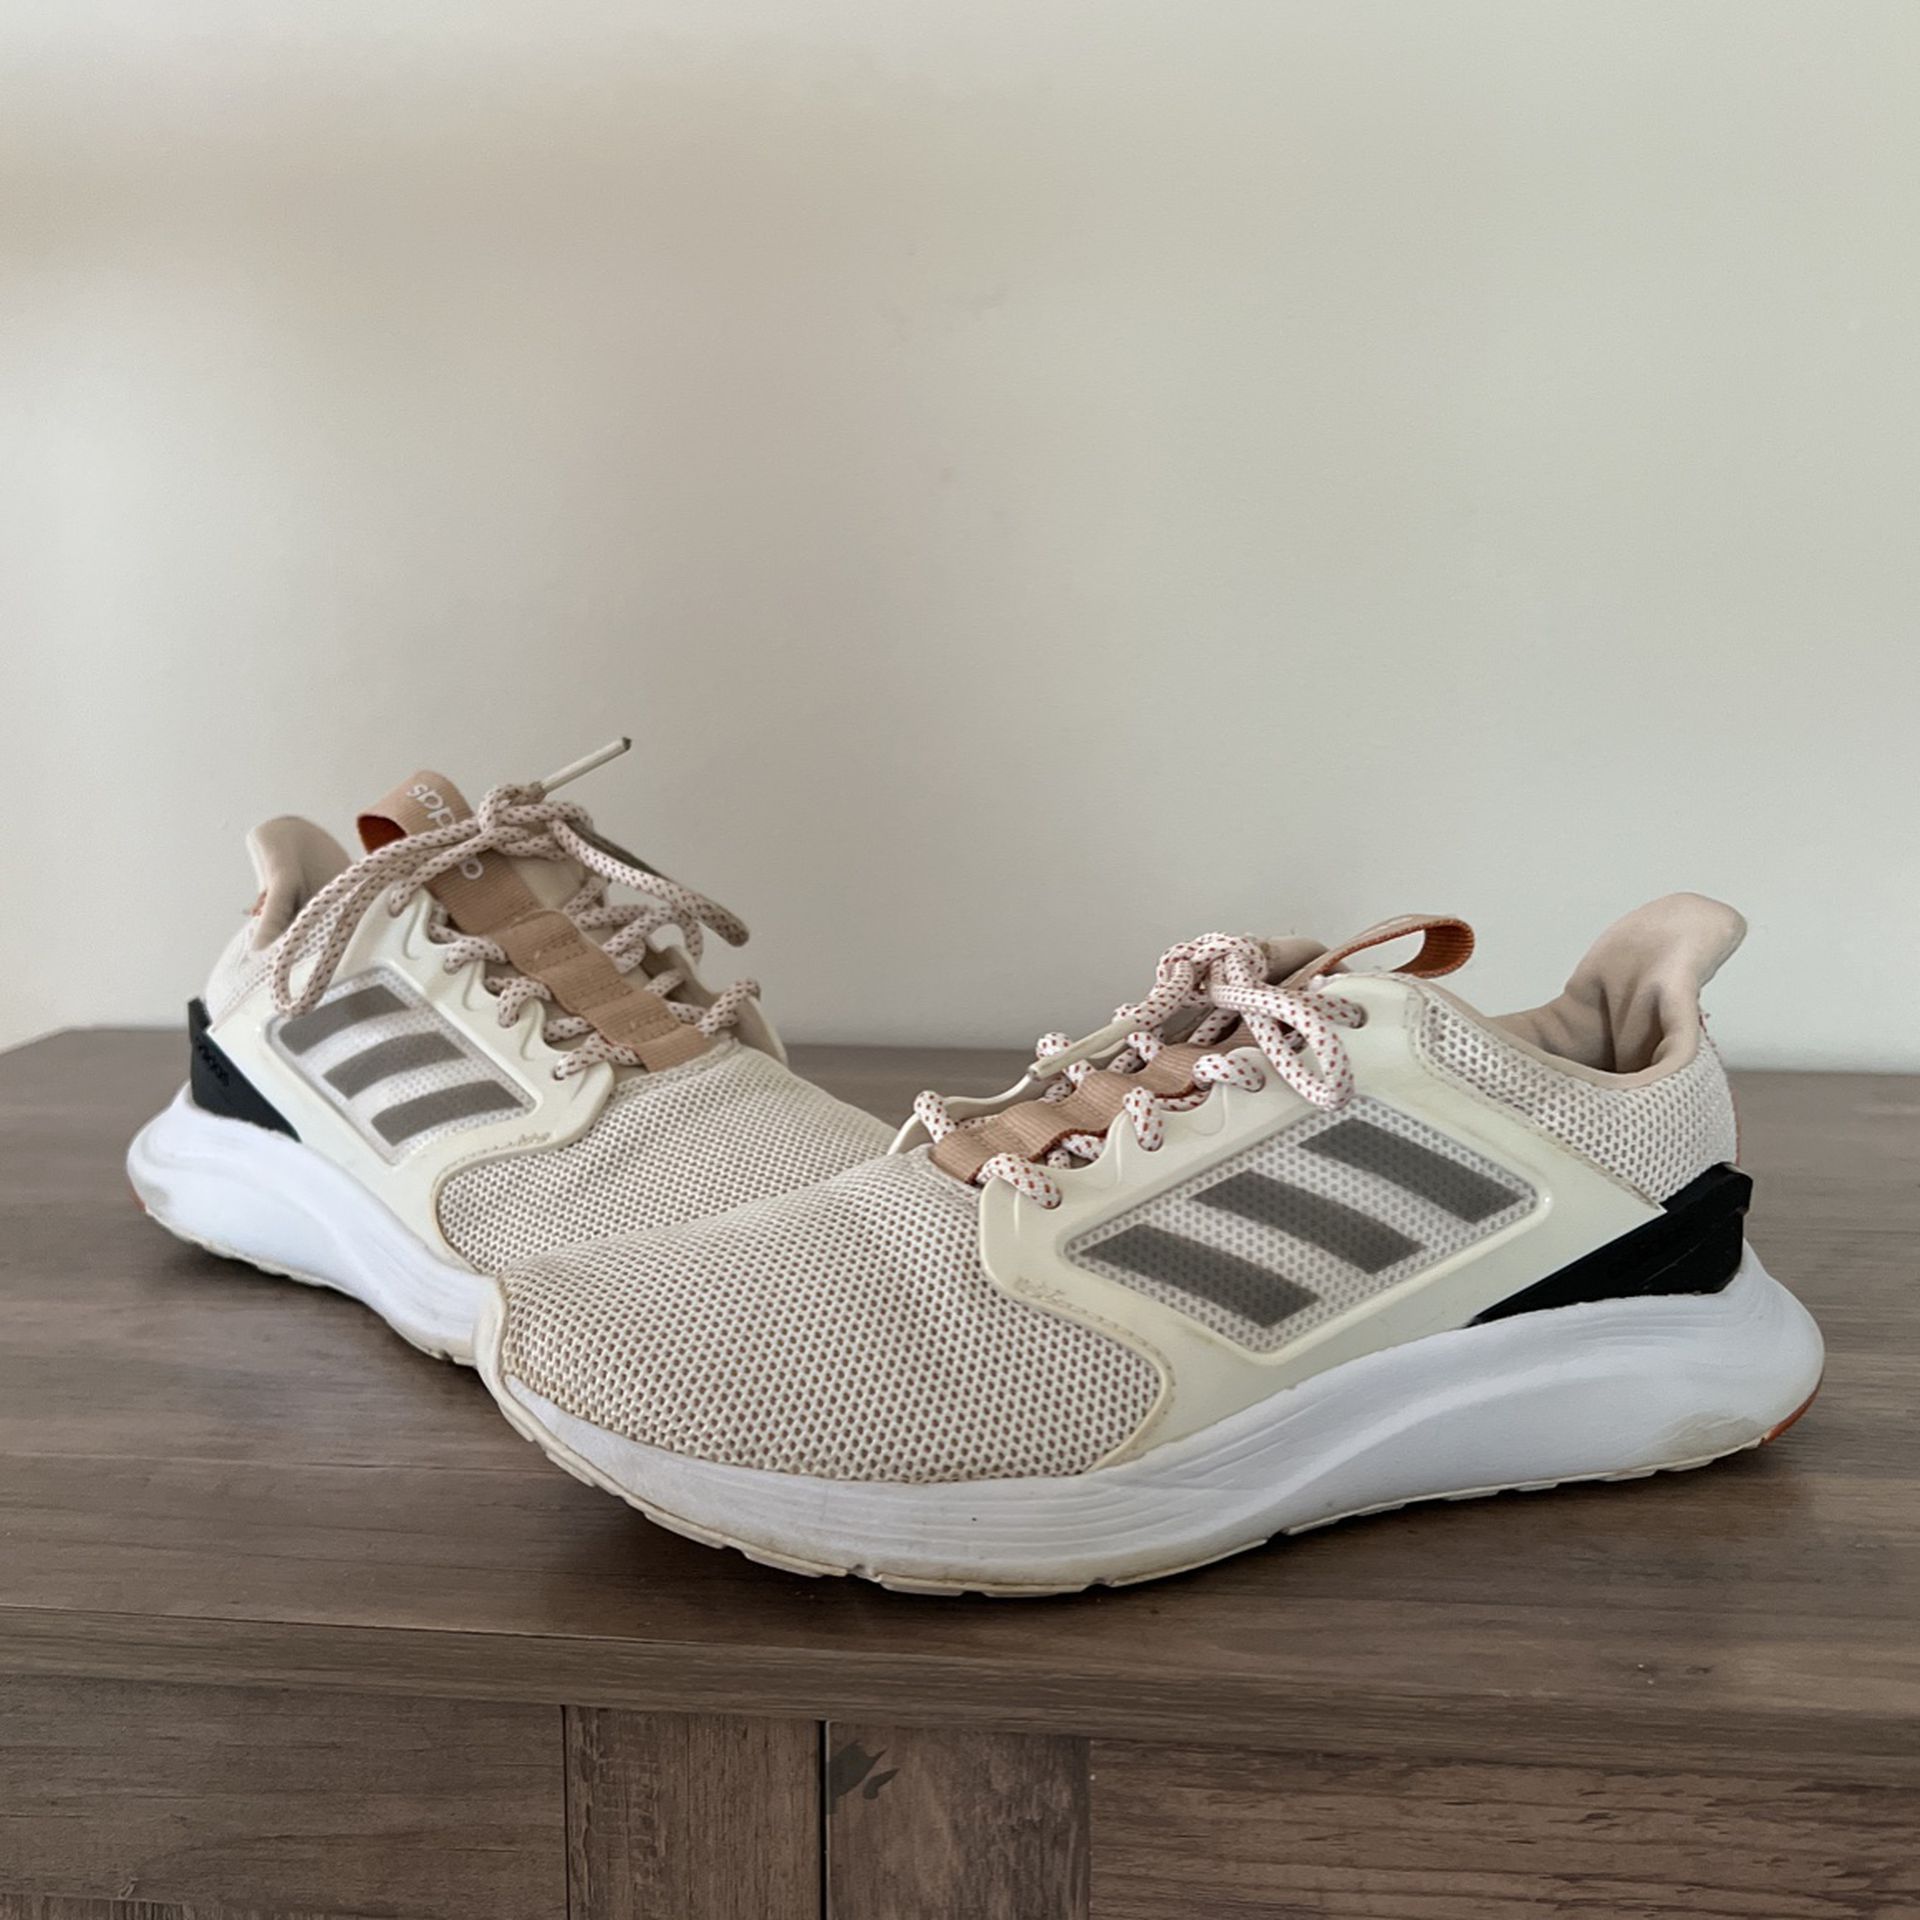 ADIDAS Energyfalcon X ee9940 for Sale in Naperville, IL - OfferUp